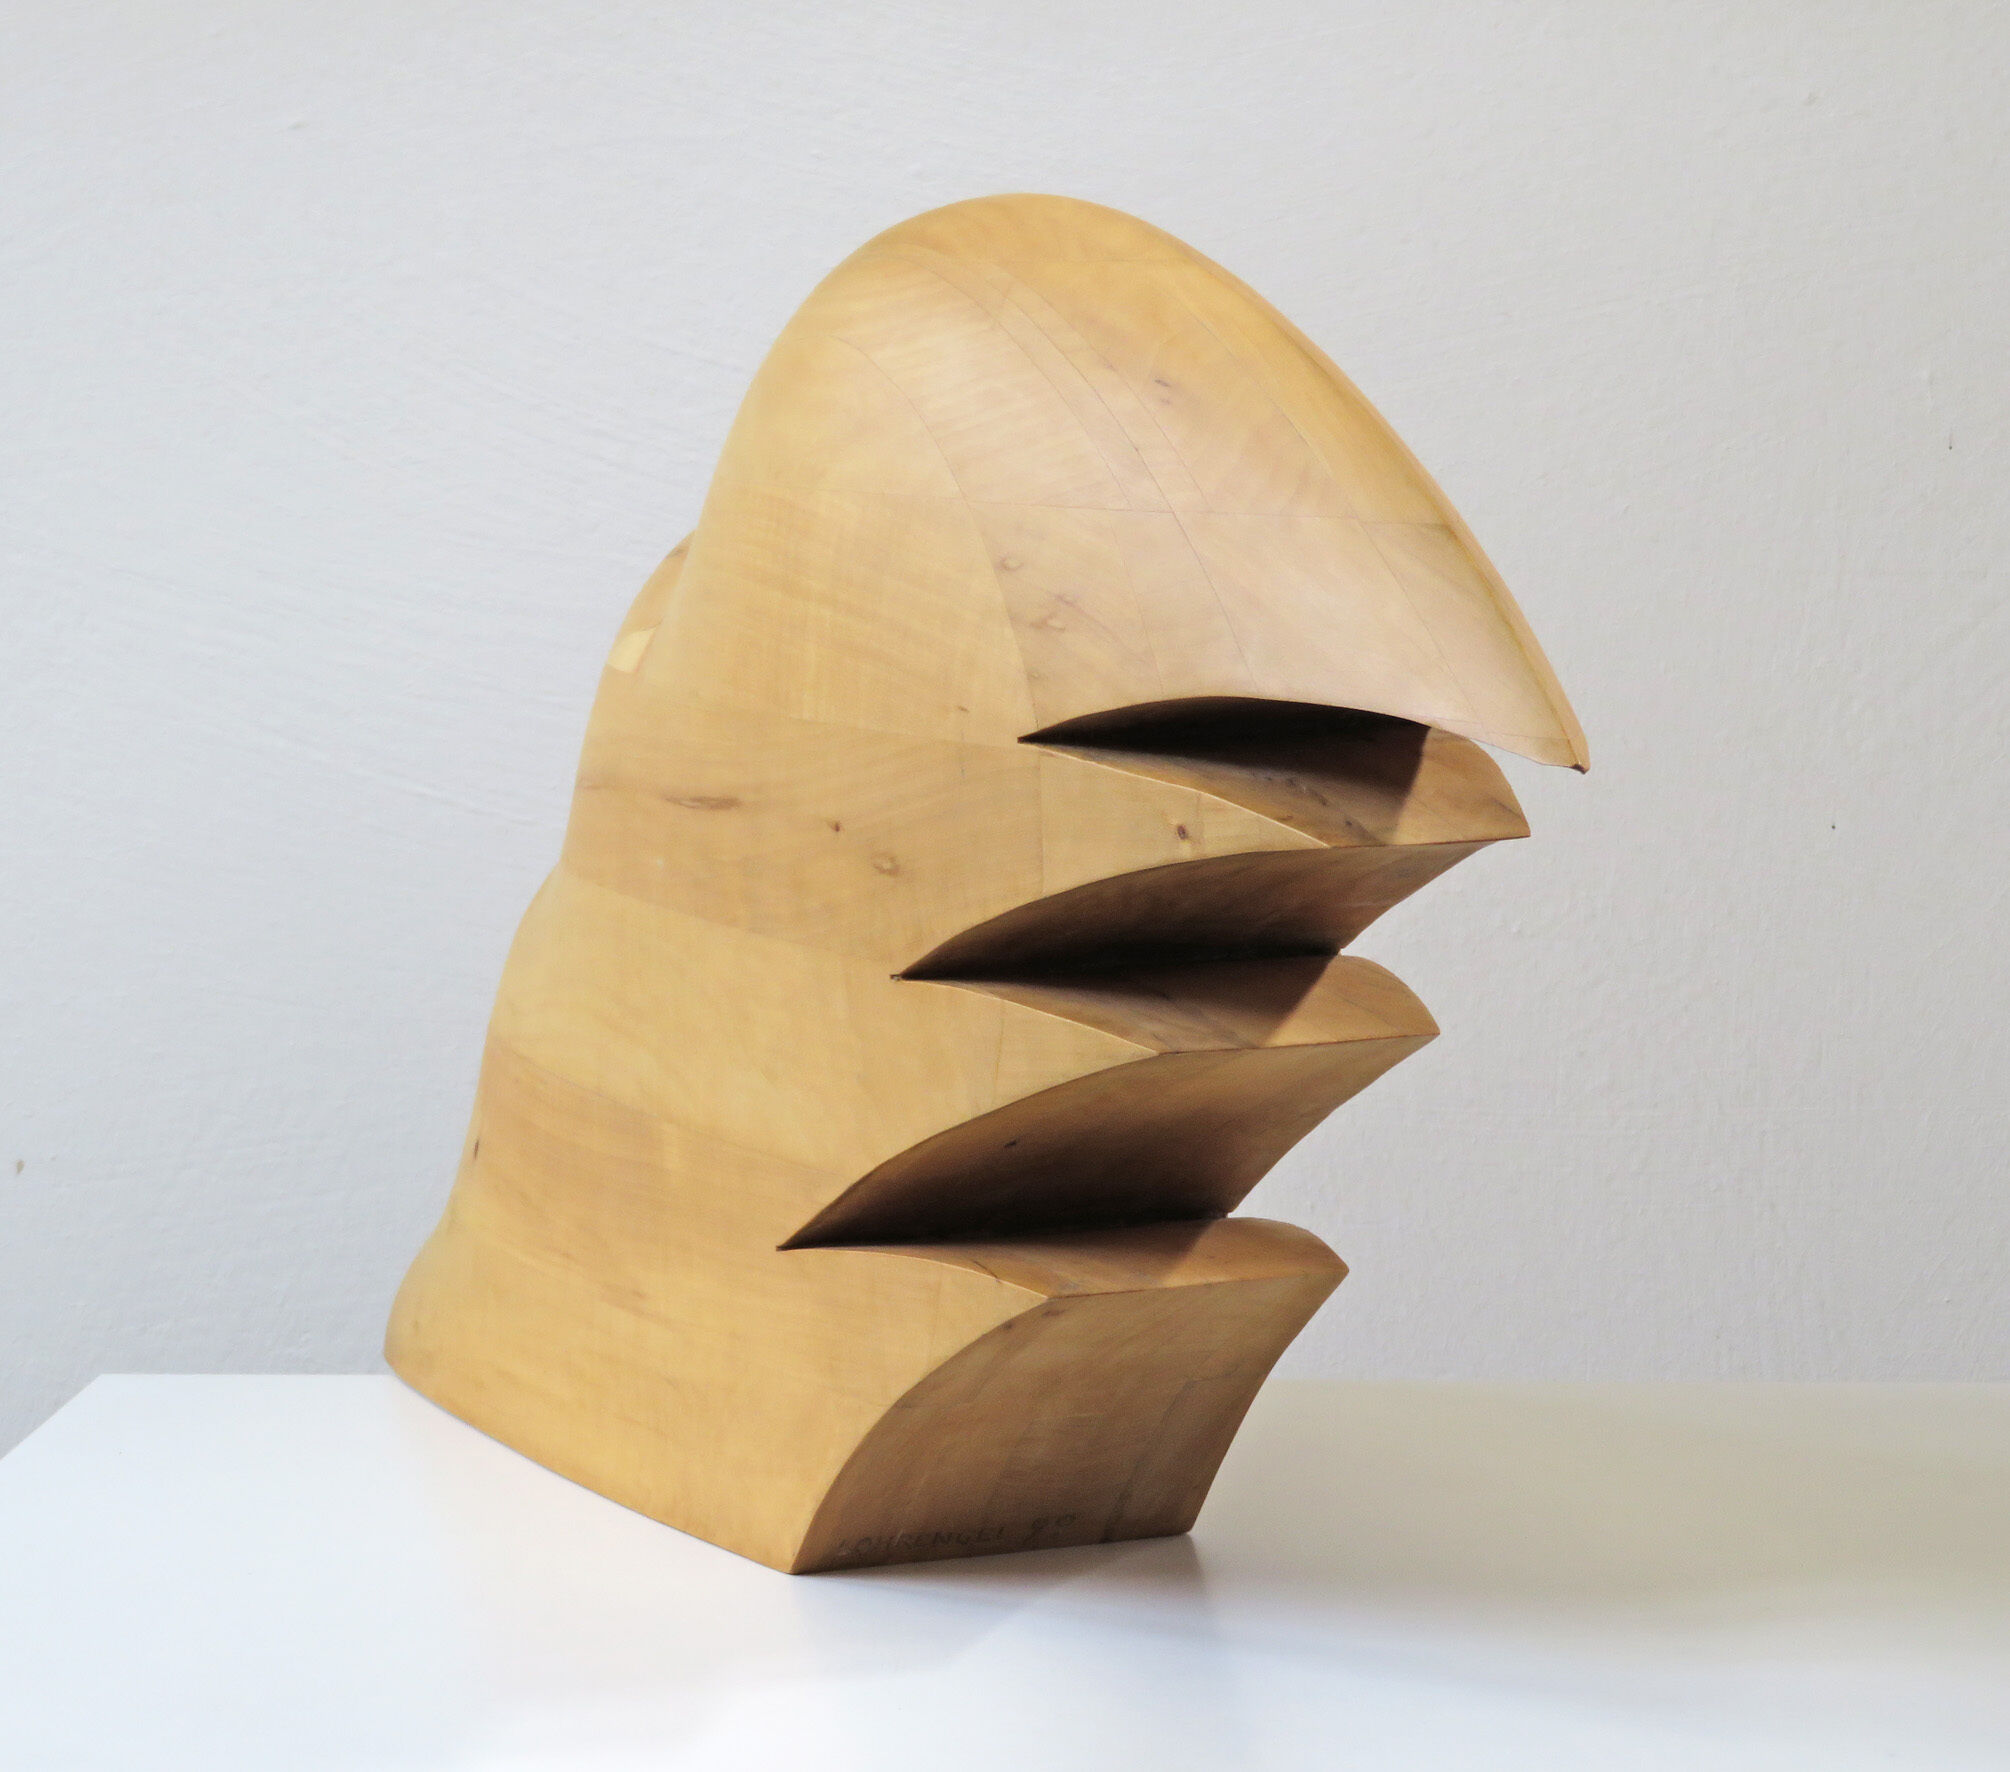 Sculpture "Head blown by the wind" (2016)